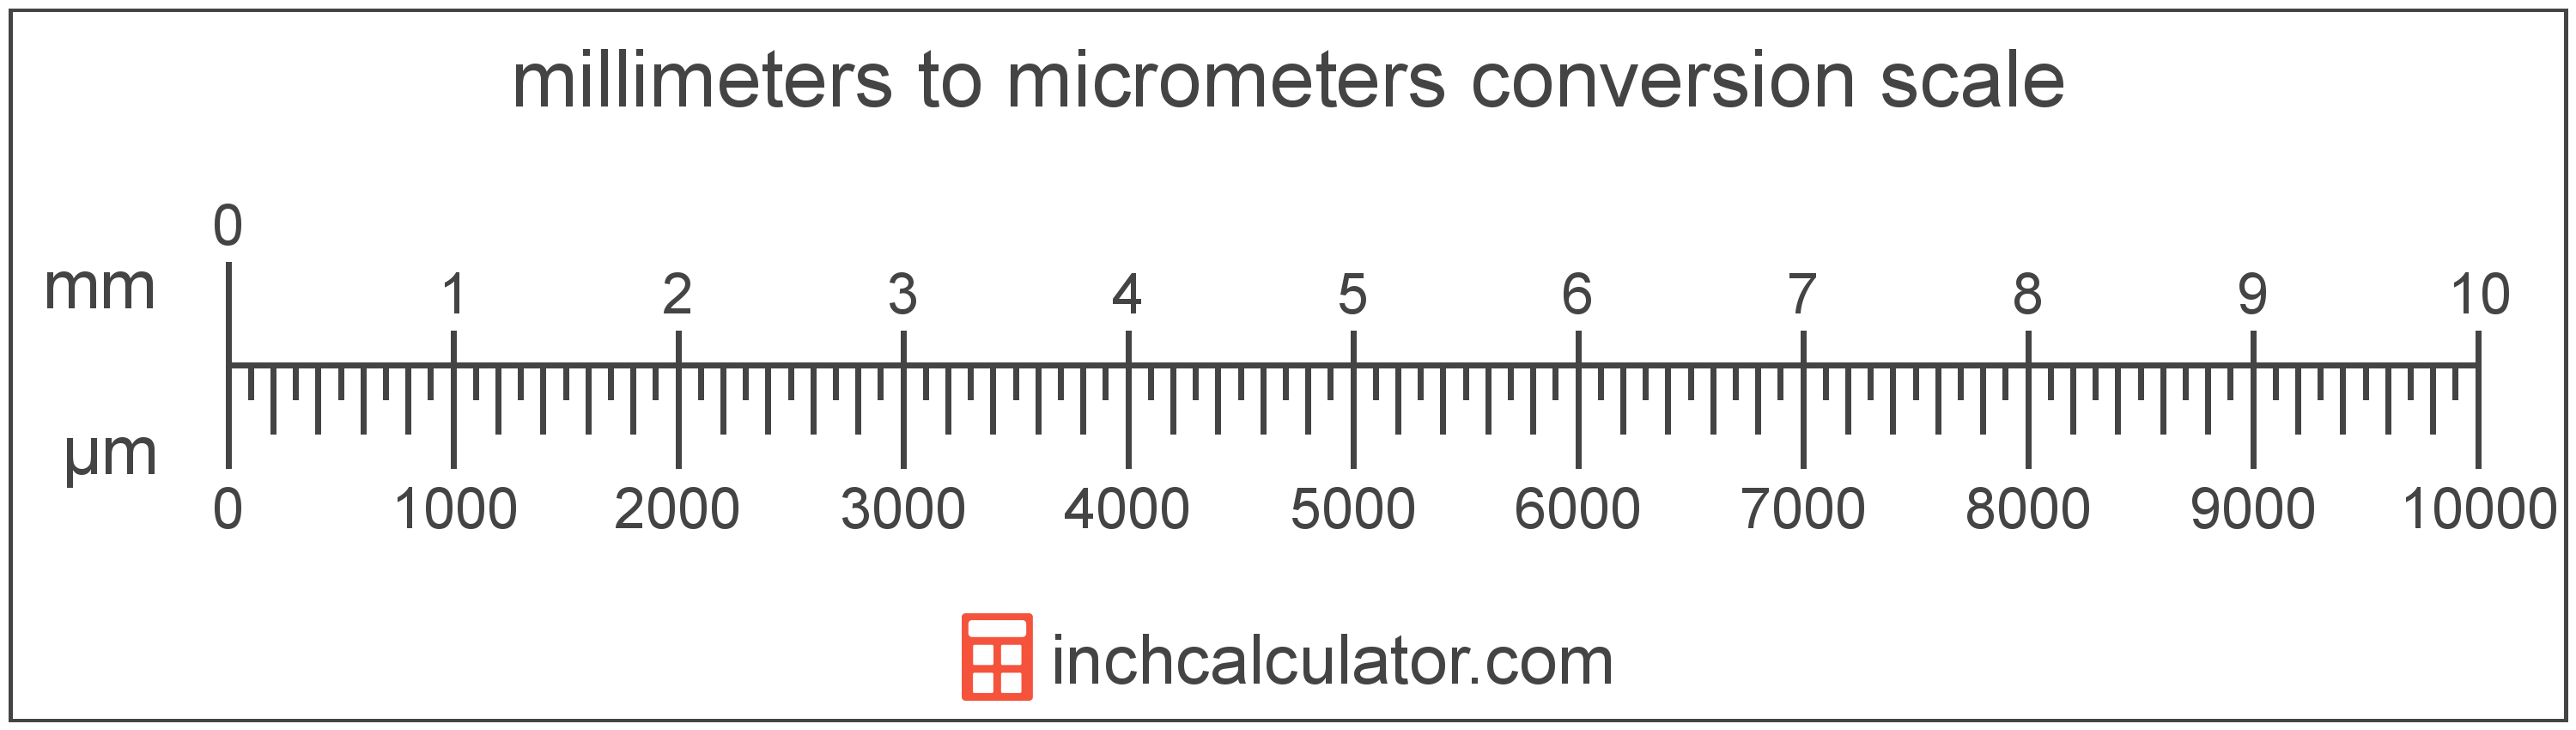 micrometers-to-millimeters-conversion-m-to-mm